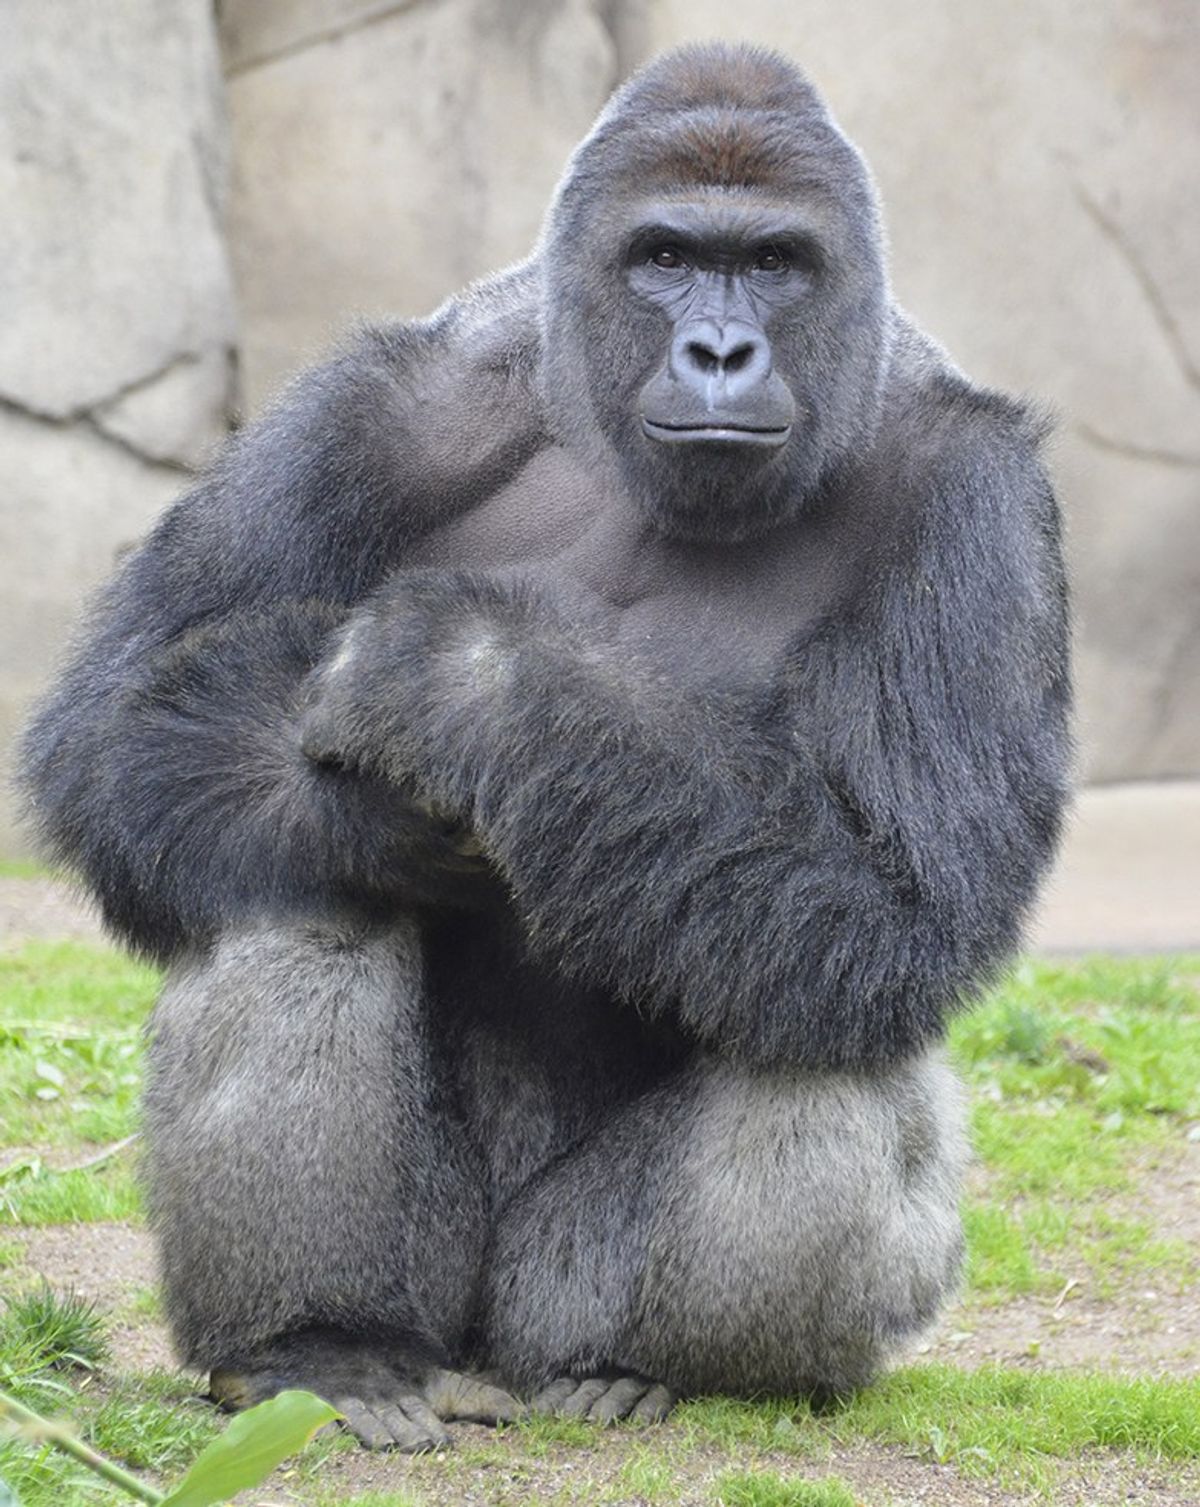 Should The Gorilla Have Been Shot: Yes Or No?